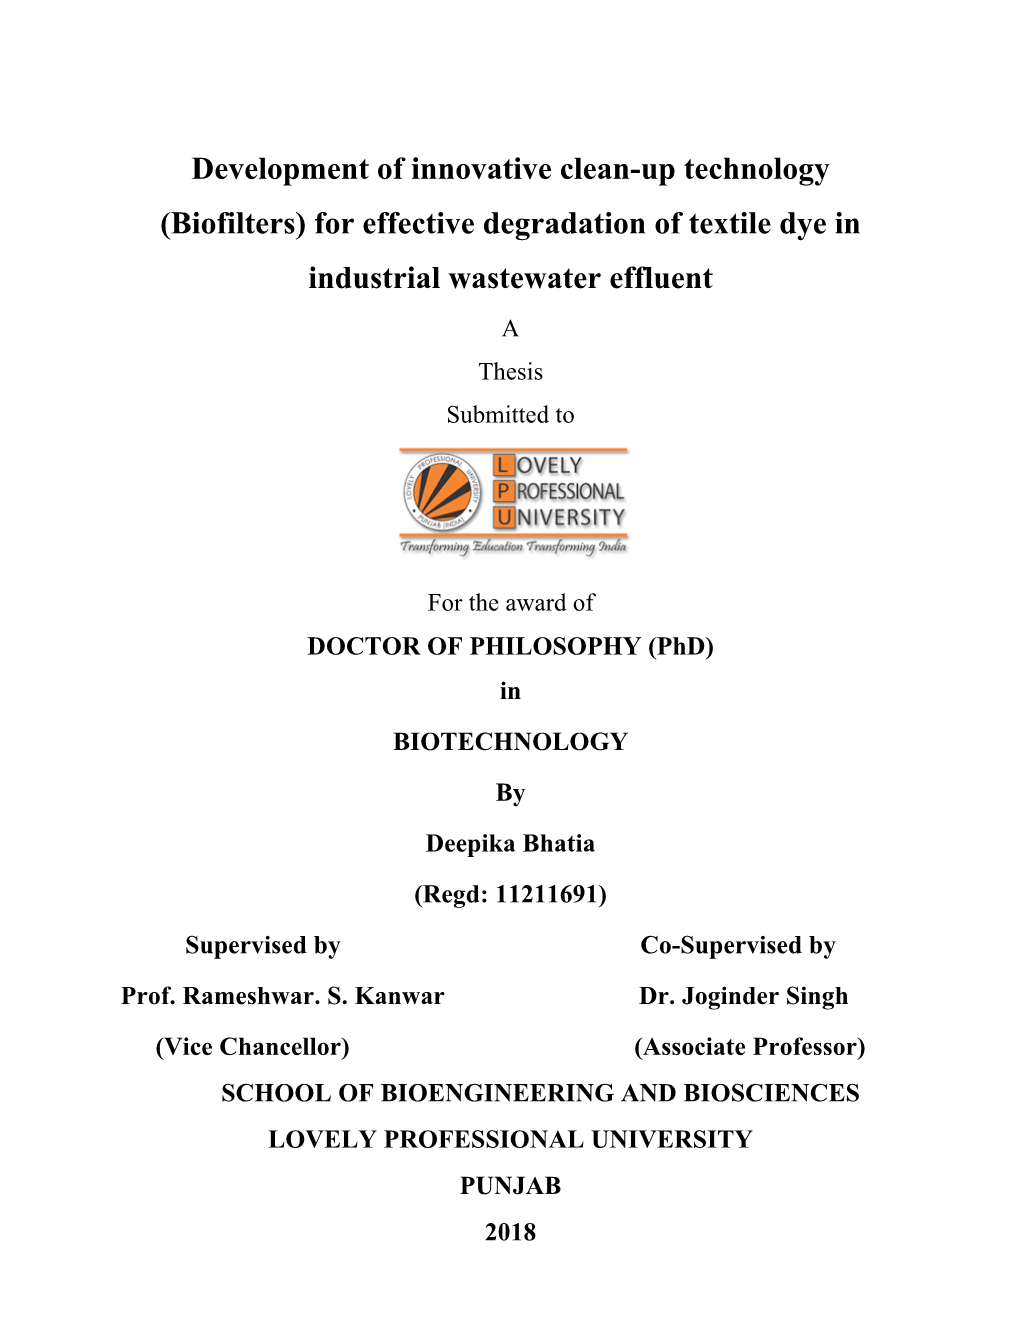 For Effective Degradation of Textile Dye in Industrial Wastewater Effluent a Thesis Submitted To